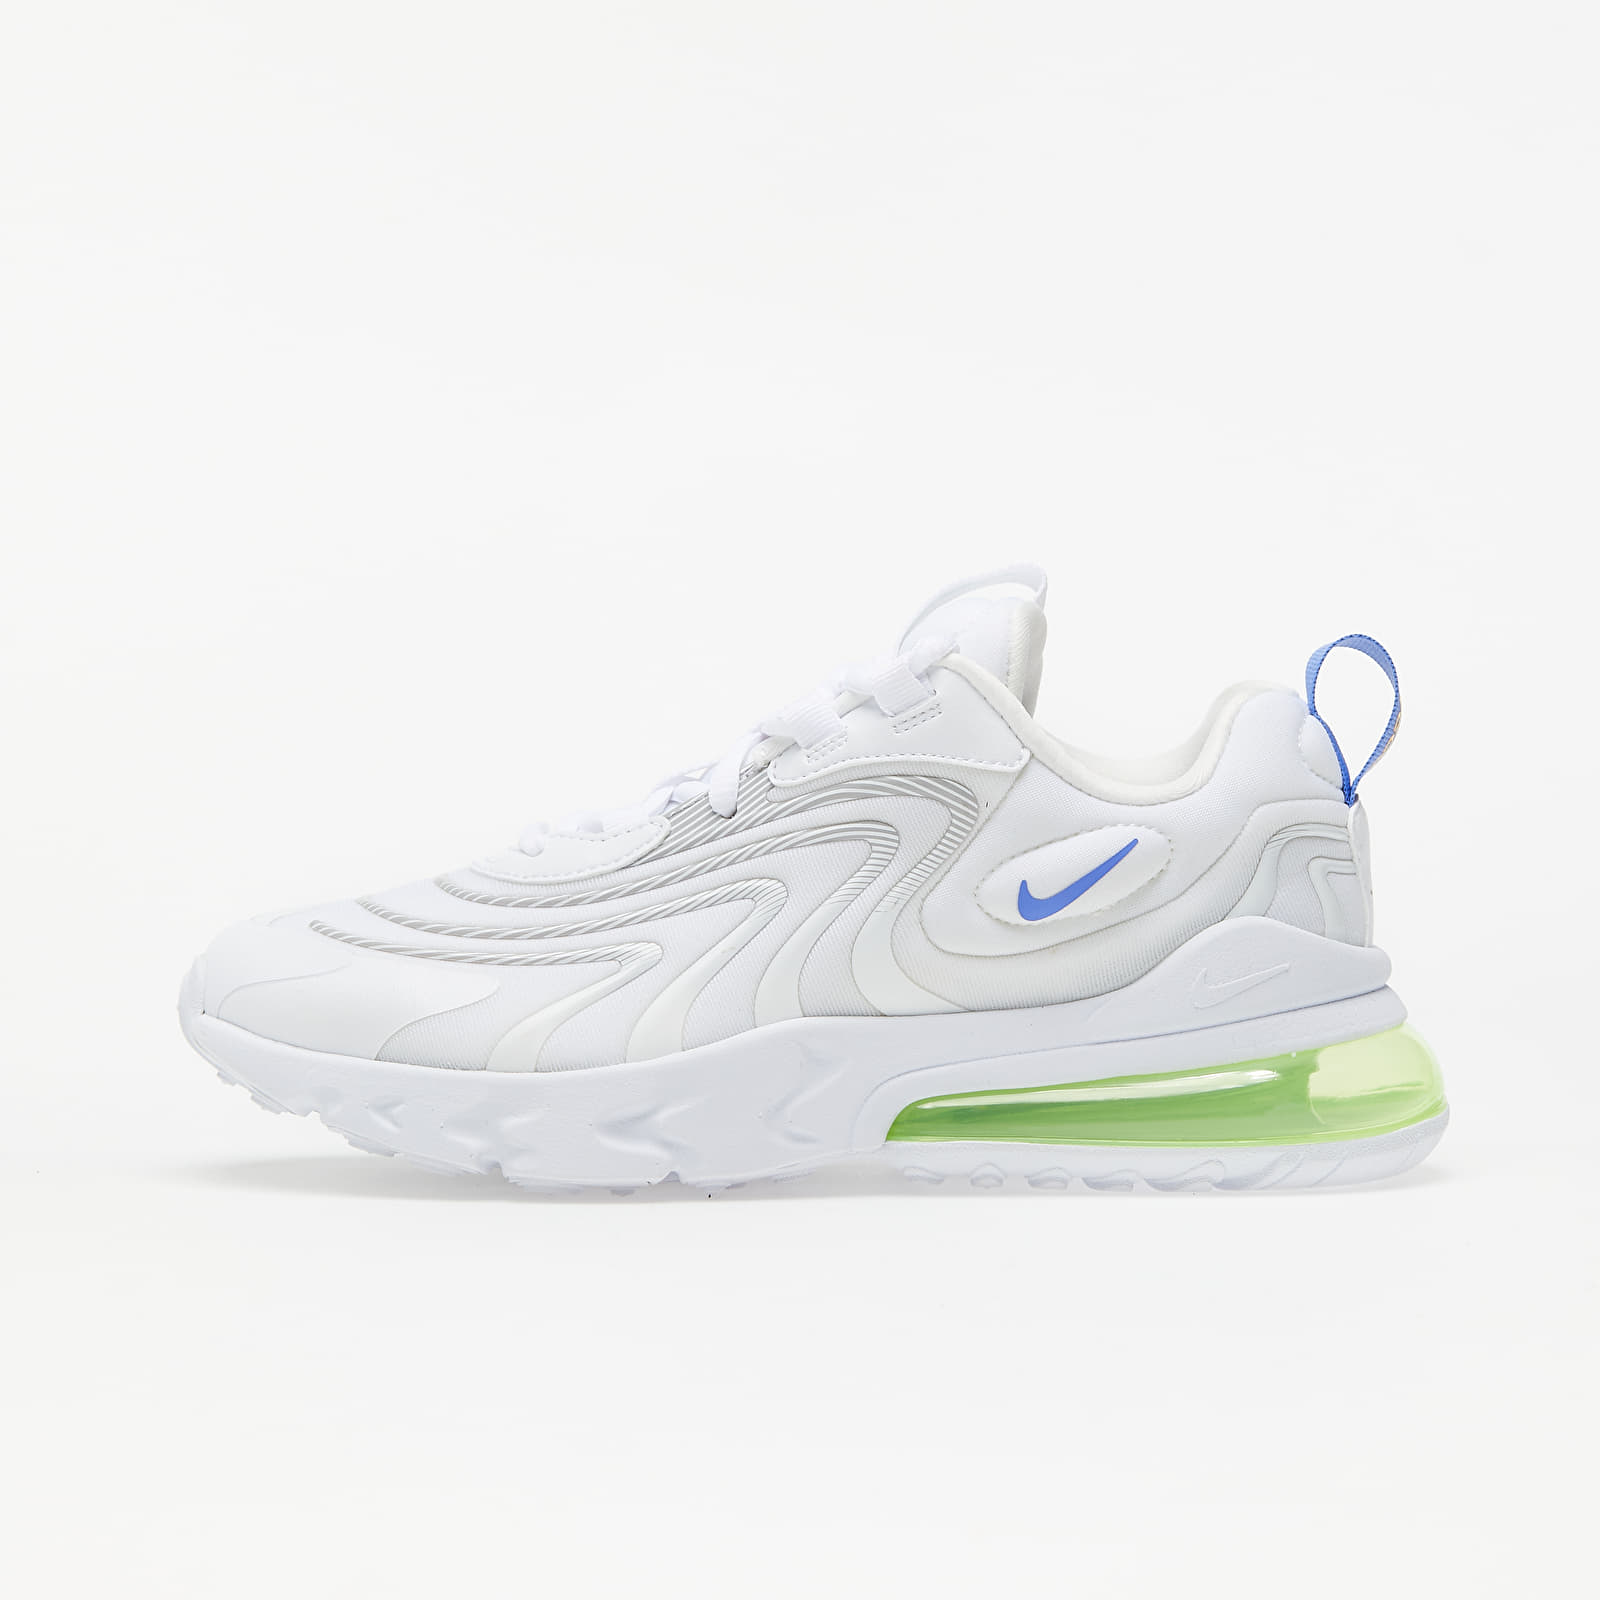 Kids' sneakers and shoes Nike Air Max 270 React ENG GS White/ Sapphire-Laser Orange-Aurora Green